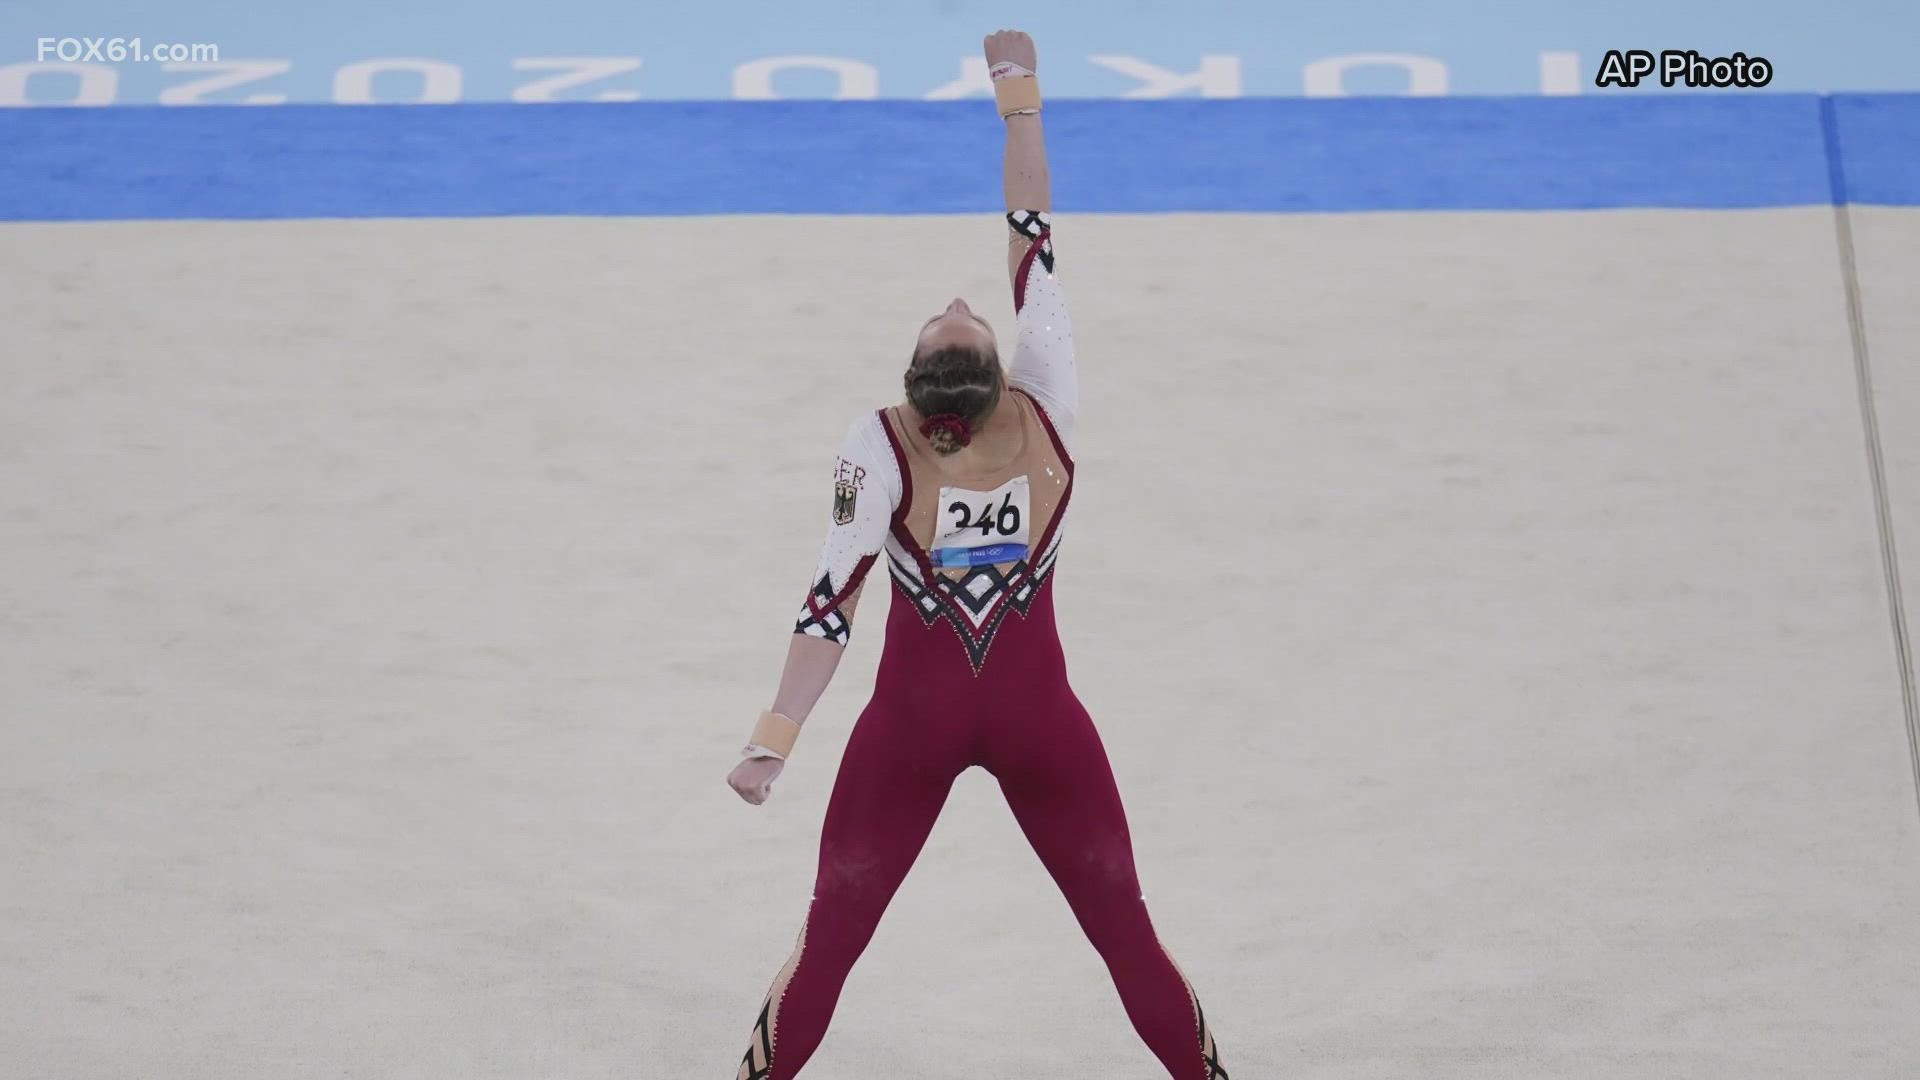 German Olympic gymnasts' uniforms are a stand 'against sexualization